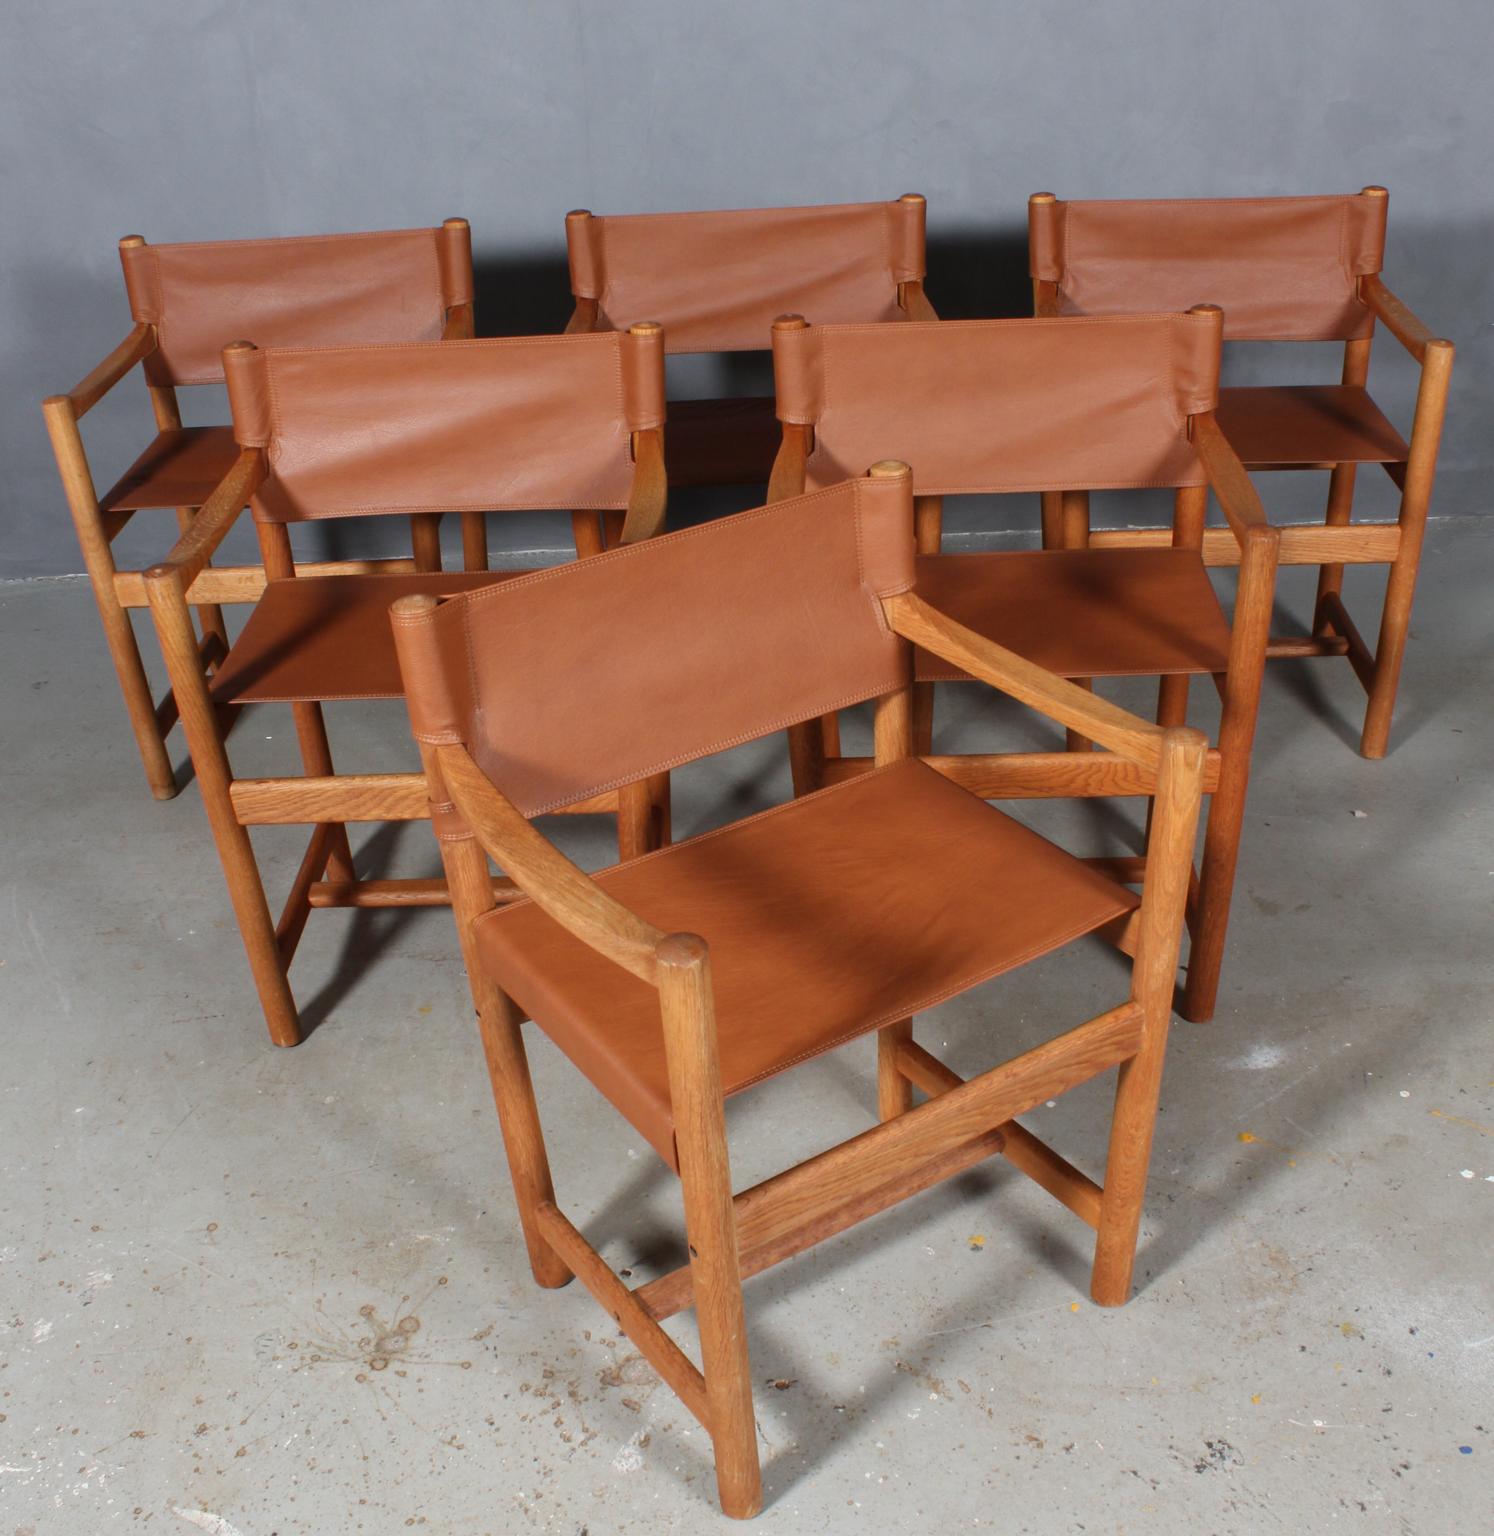 Ditte Heath armchairs in oak. 

New upholstered with tan aniline leather.

Model J102, made by FDB.